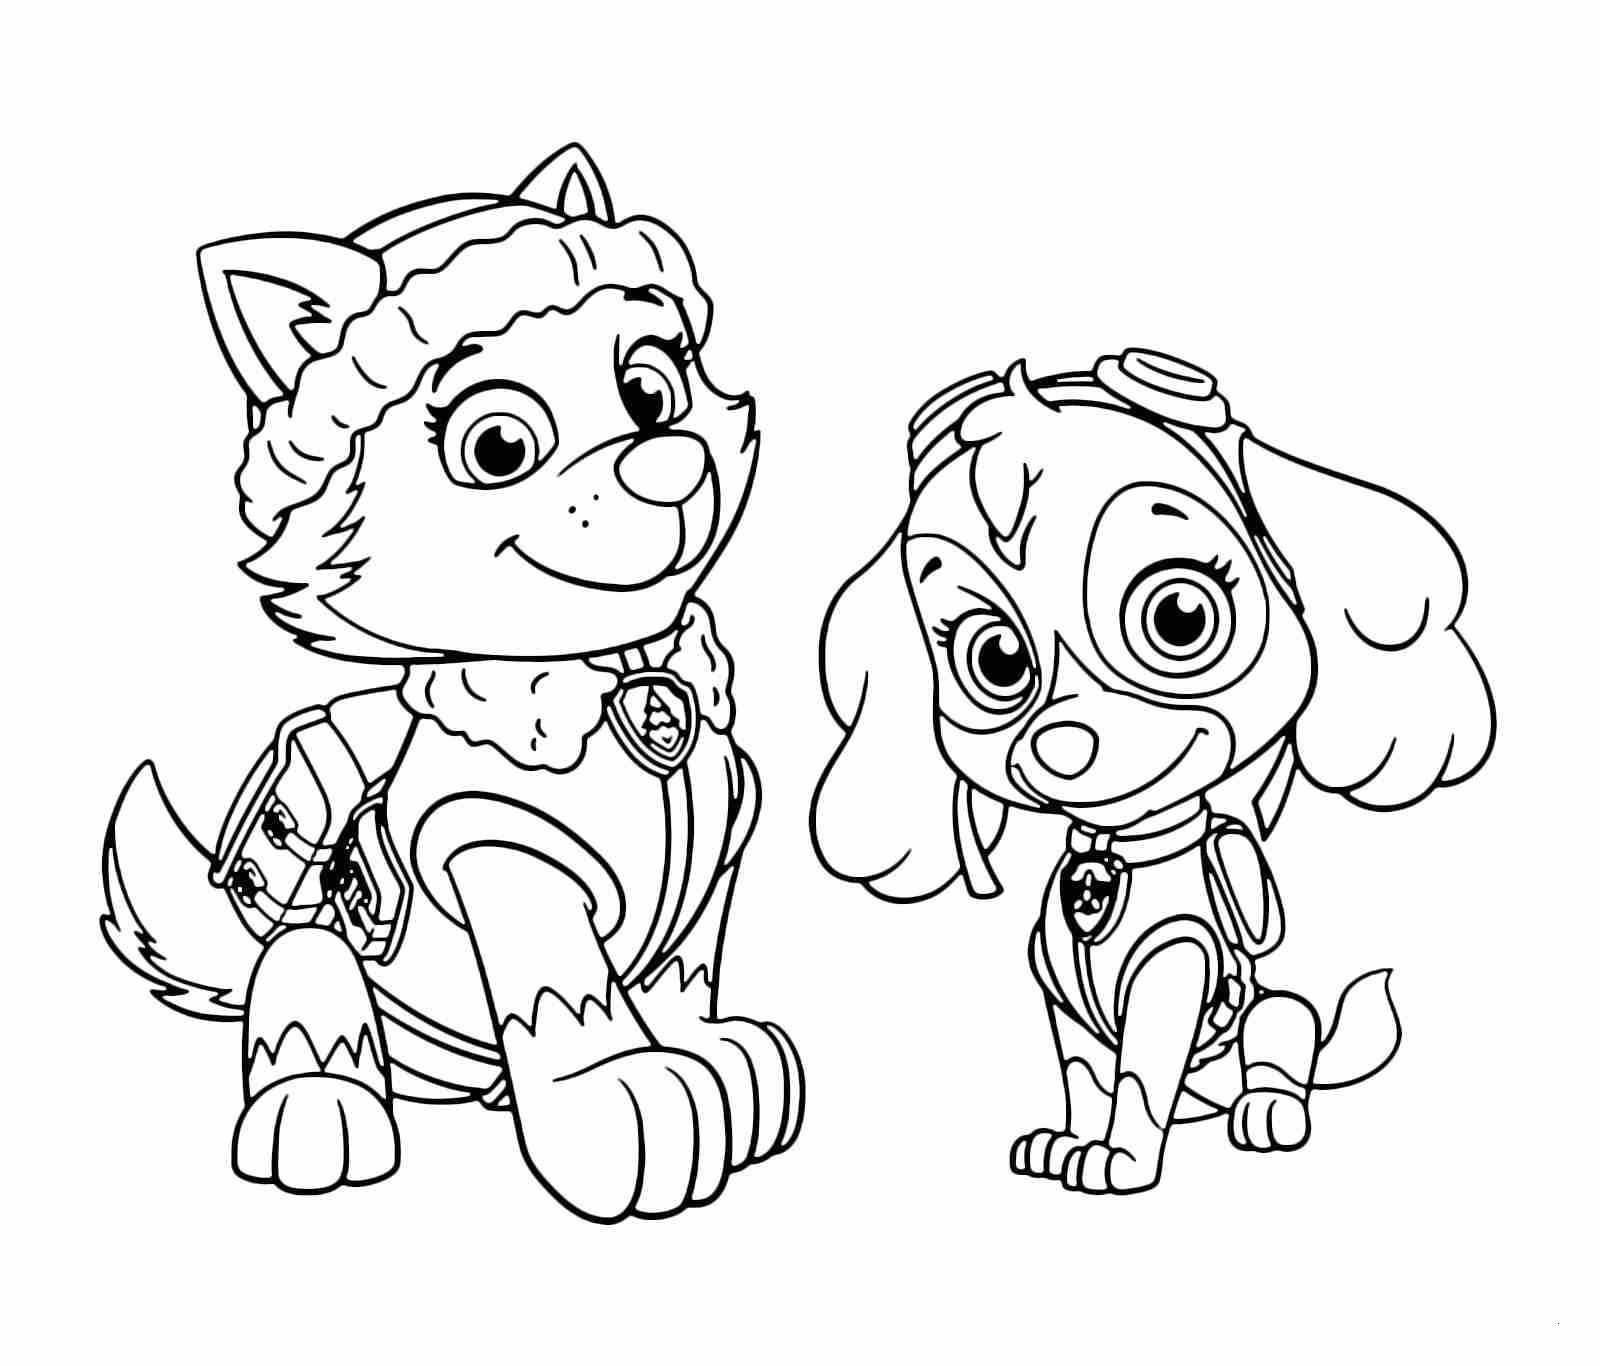 paw partol coloring page